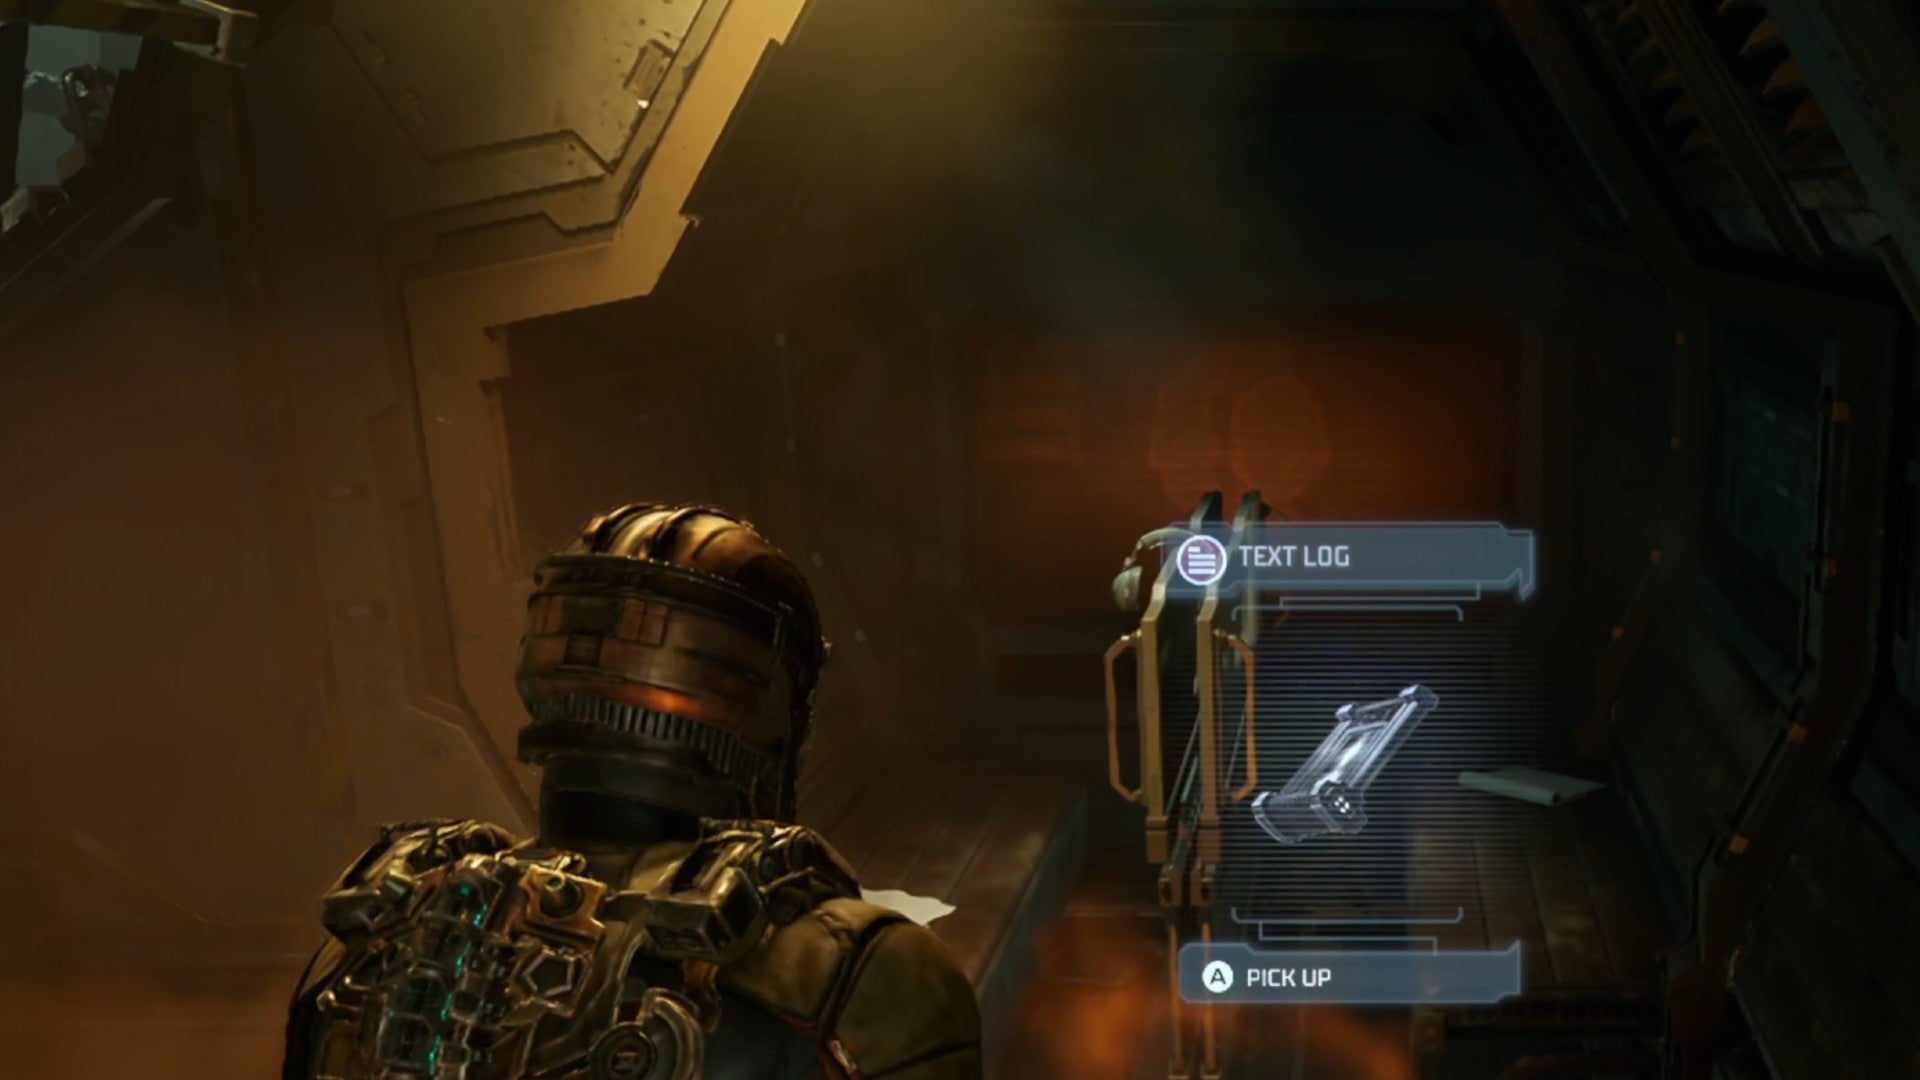 Dead Space image showing a Text Log on the Kellion.